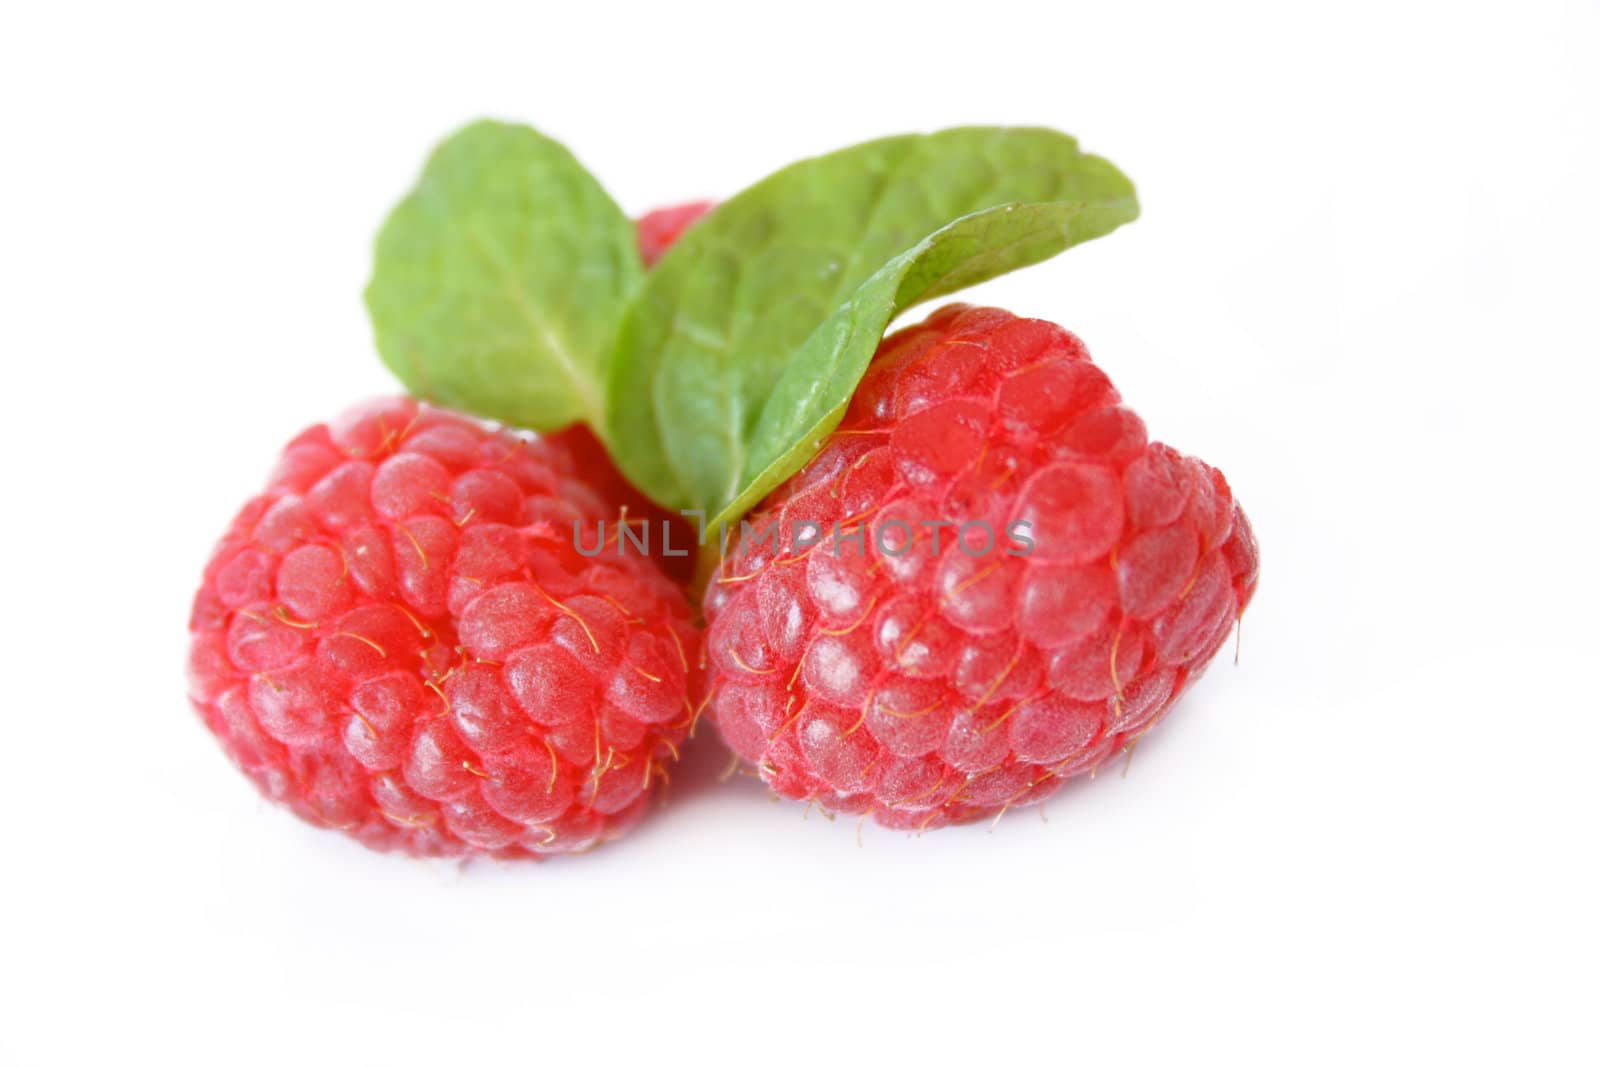 Raspberries and mint leaves shot on a white background. Used a shallow depth of field.